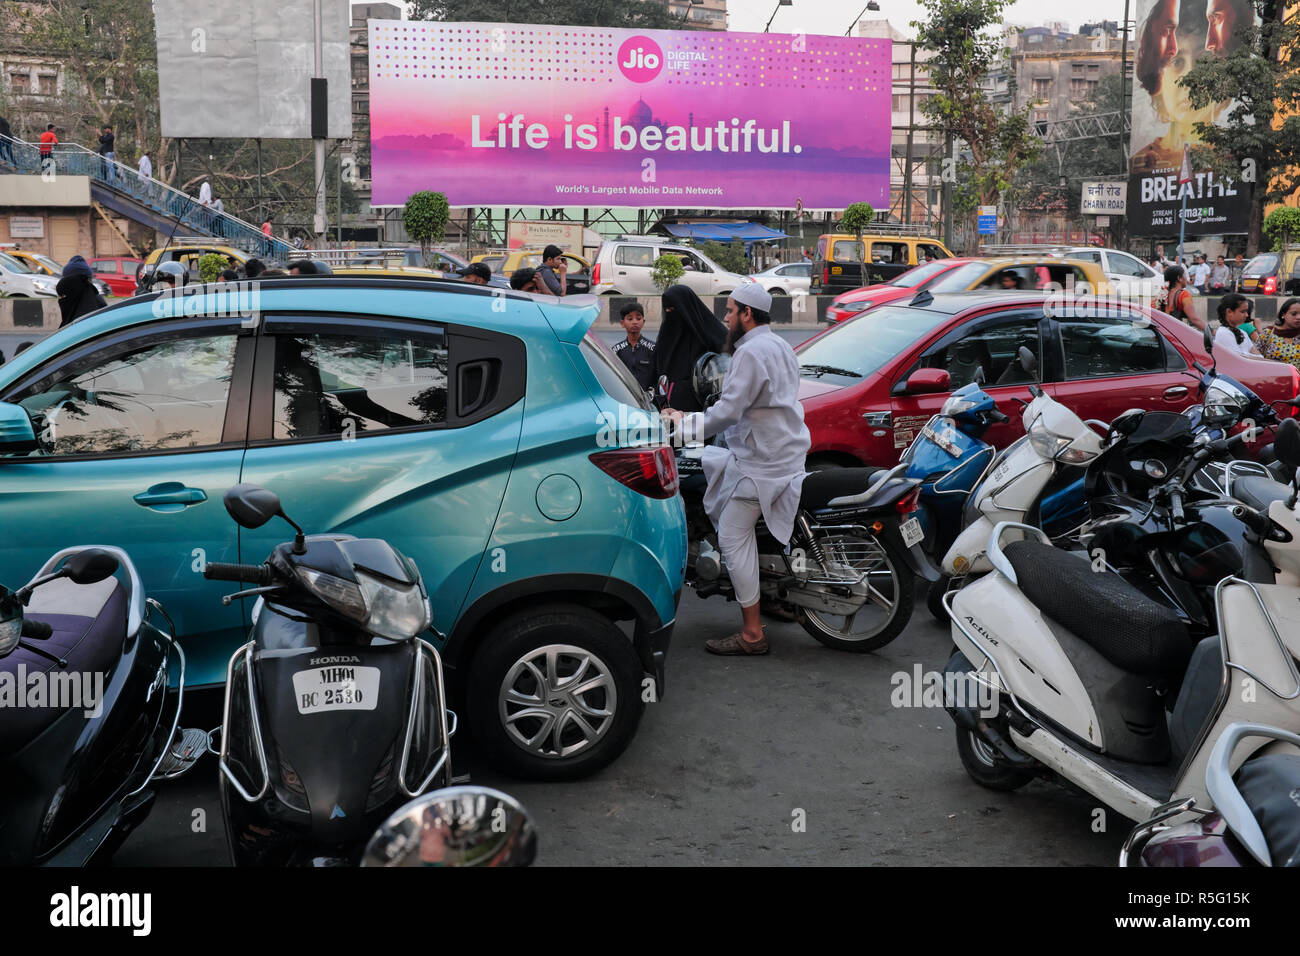 A road view of congested Marine Drive in Mumbai, India, under an advertisement of mobile phone service provider Jio, 'Life is Beautiful' Stock Photo